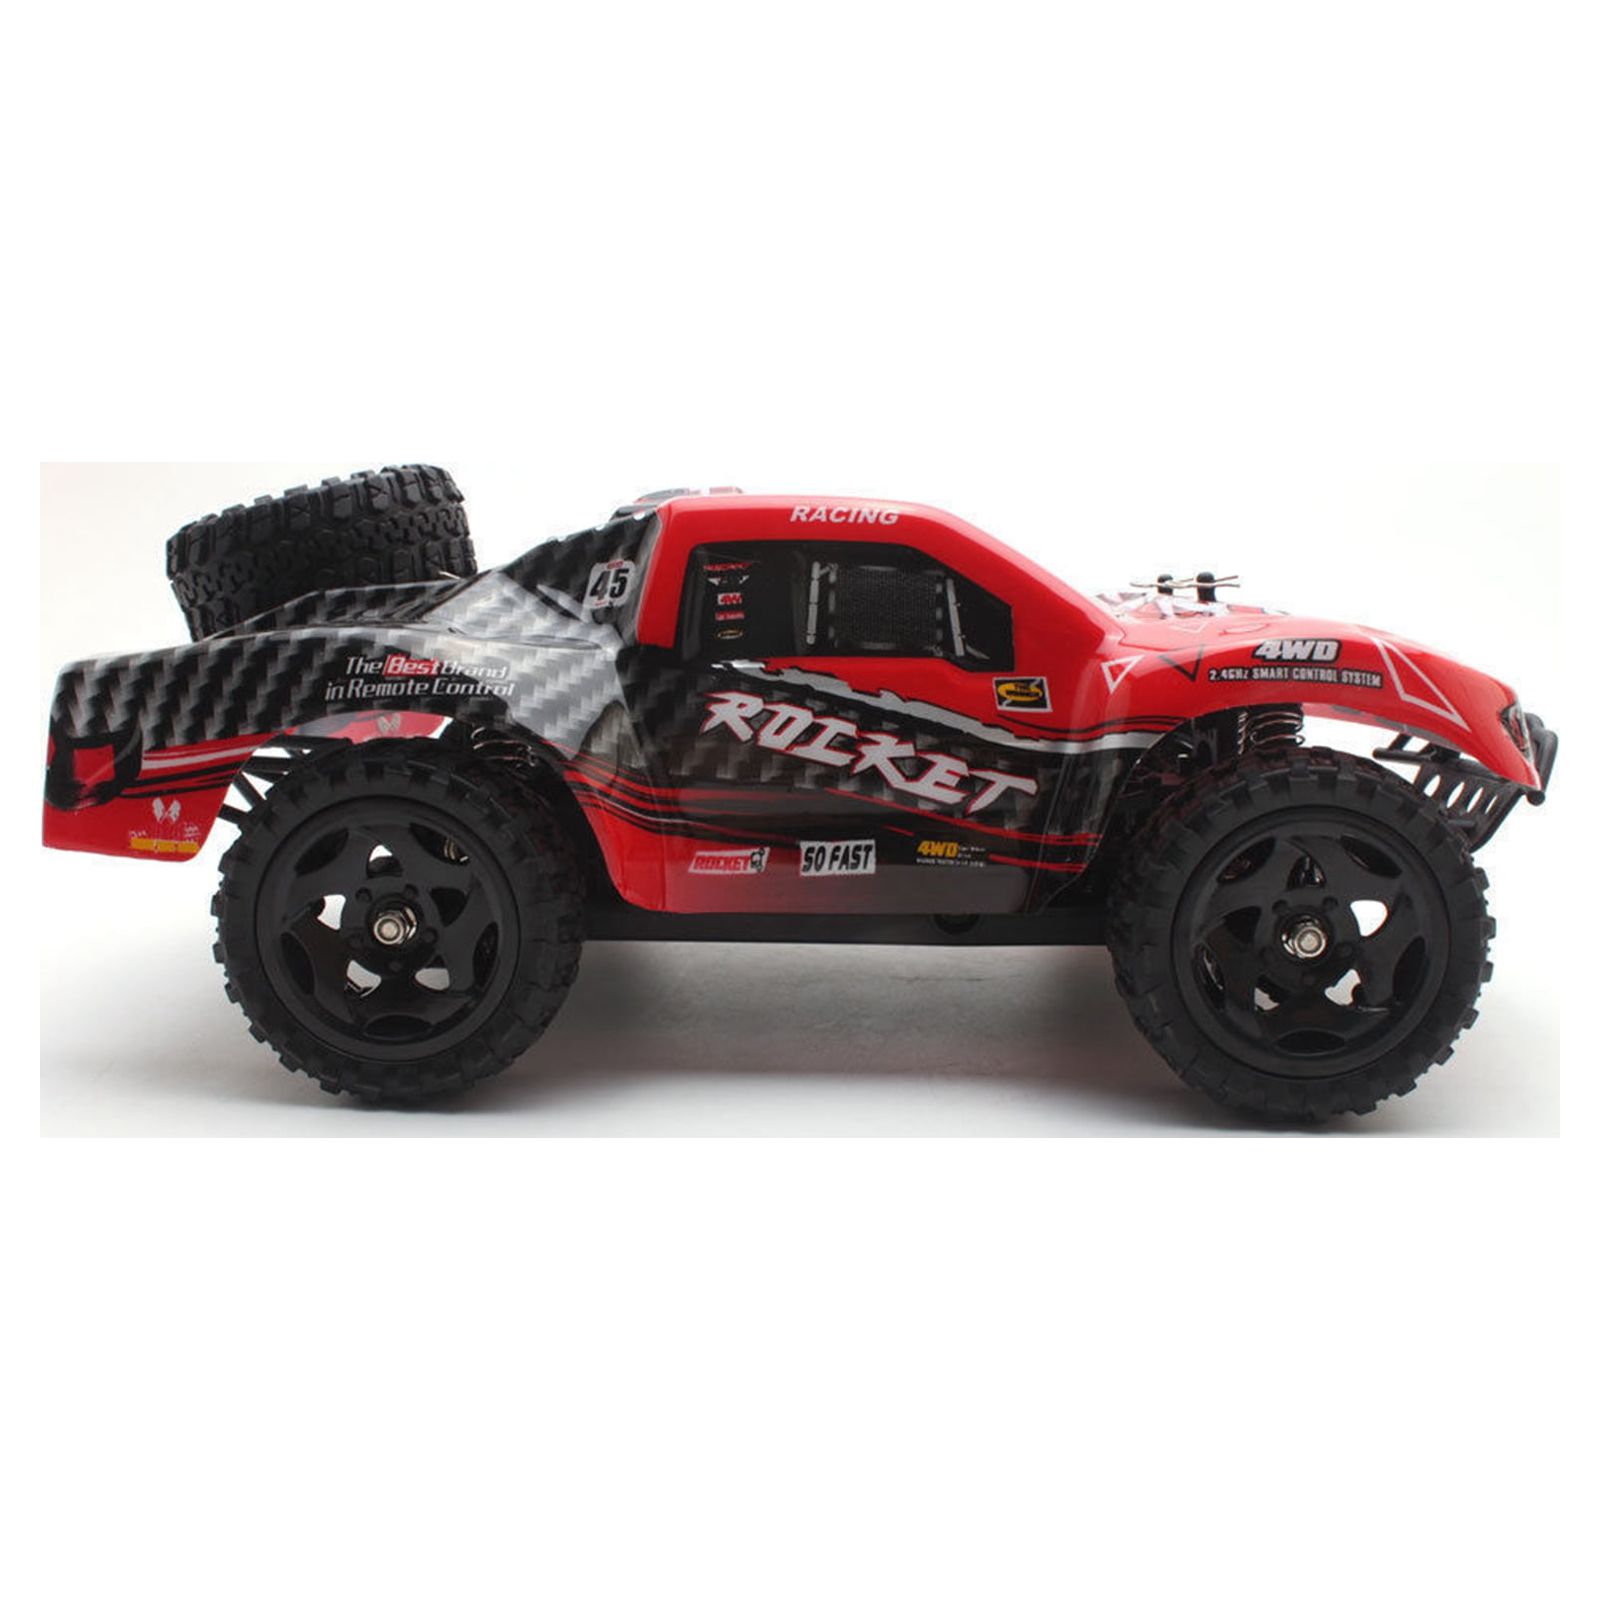 REMO 1621 2.4G 4WD 1/16 50km/h RC Truck Car Waterproof Brushed Short Course - image 3 of 7